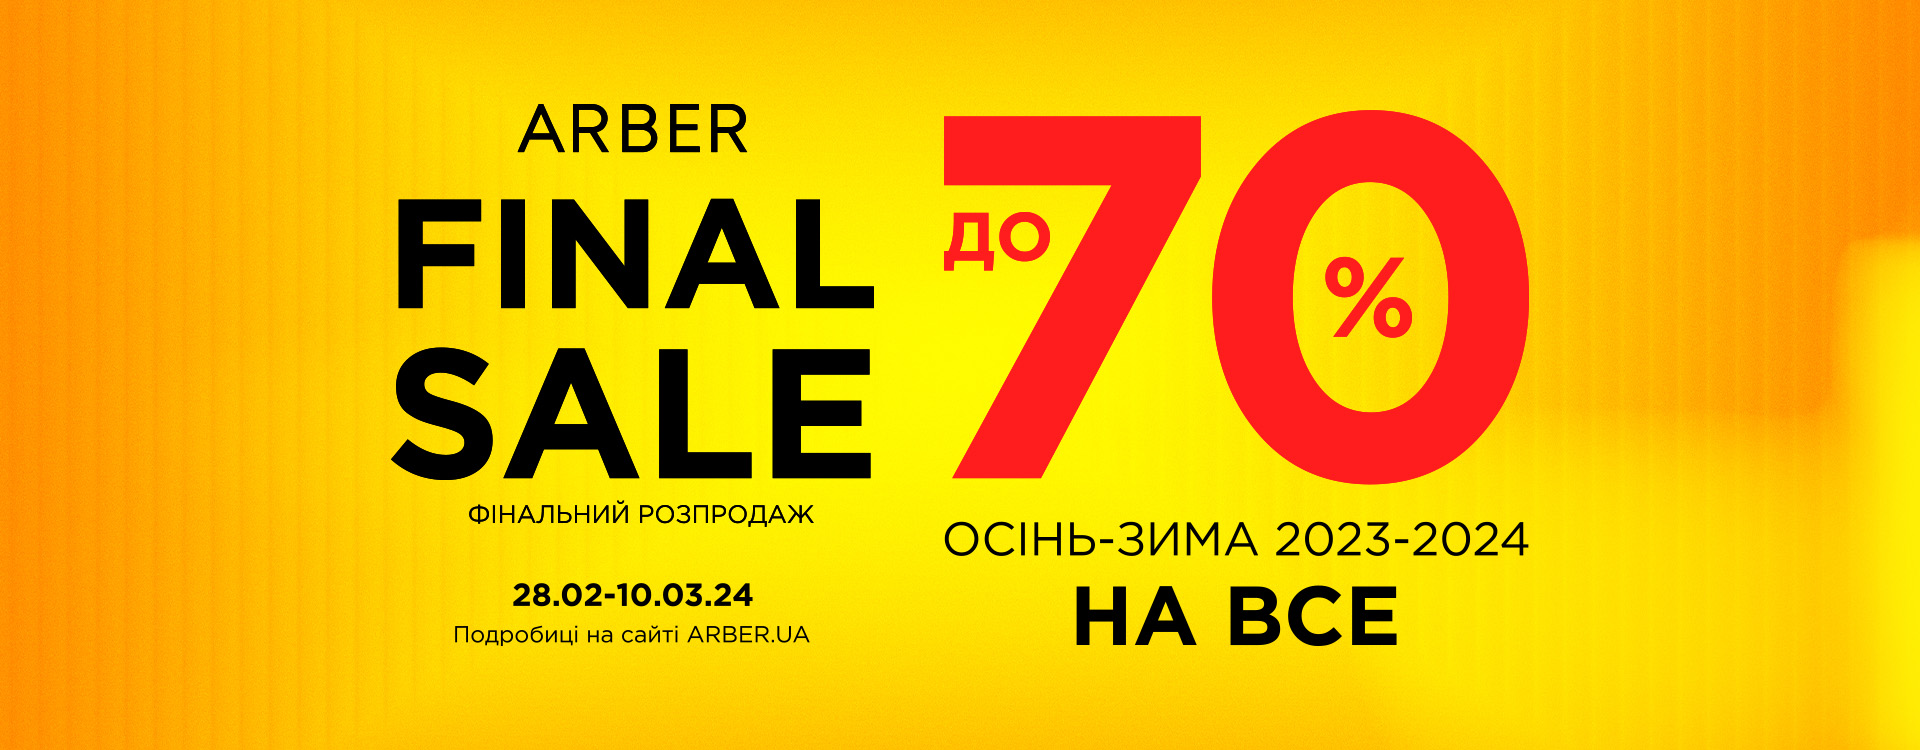 ARBER Final Sale with discounts up to -70%